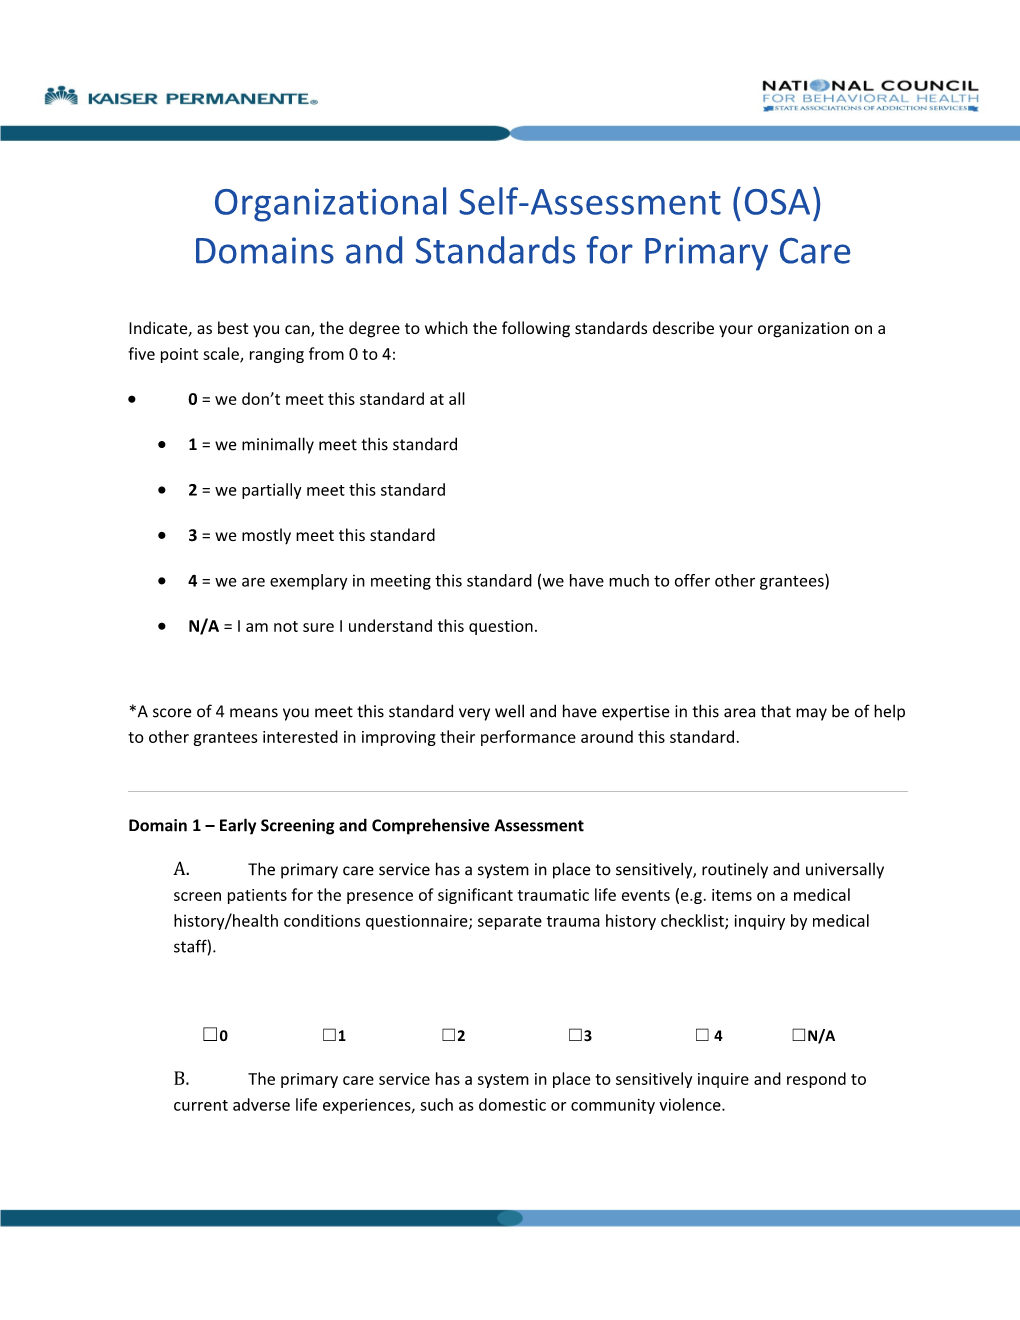 Organizational Self-Assessment (OSA) Domains and Standards for Primary Care